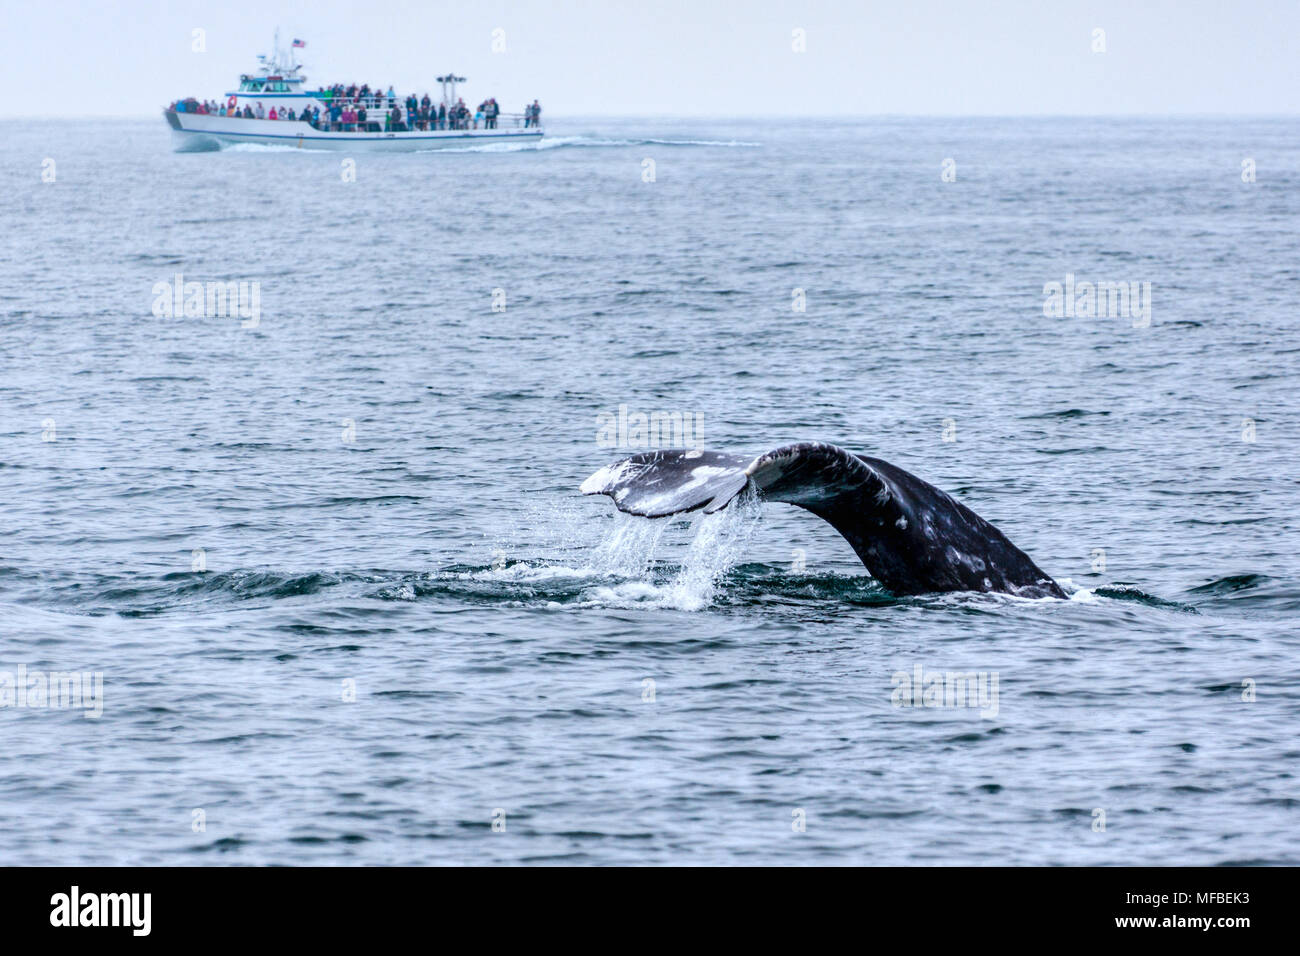 The tail of a gray whale emerged out of the water as tourists watched from a boat in the Pacific Ocean just off the coast of Southern California. Stock Photo